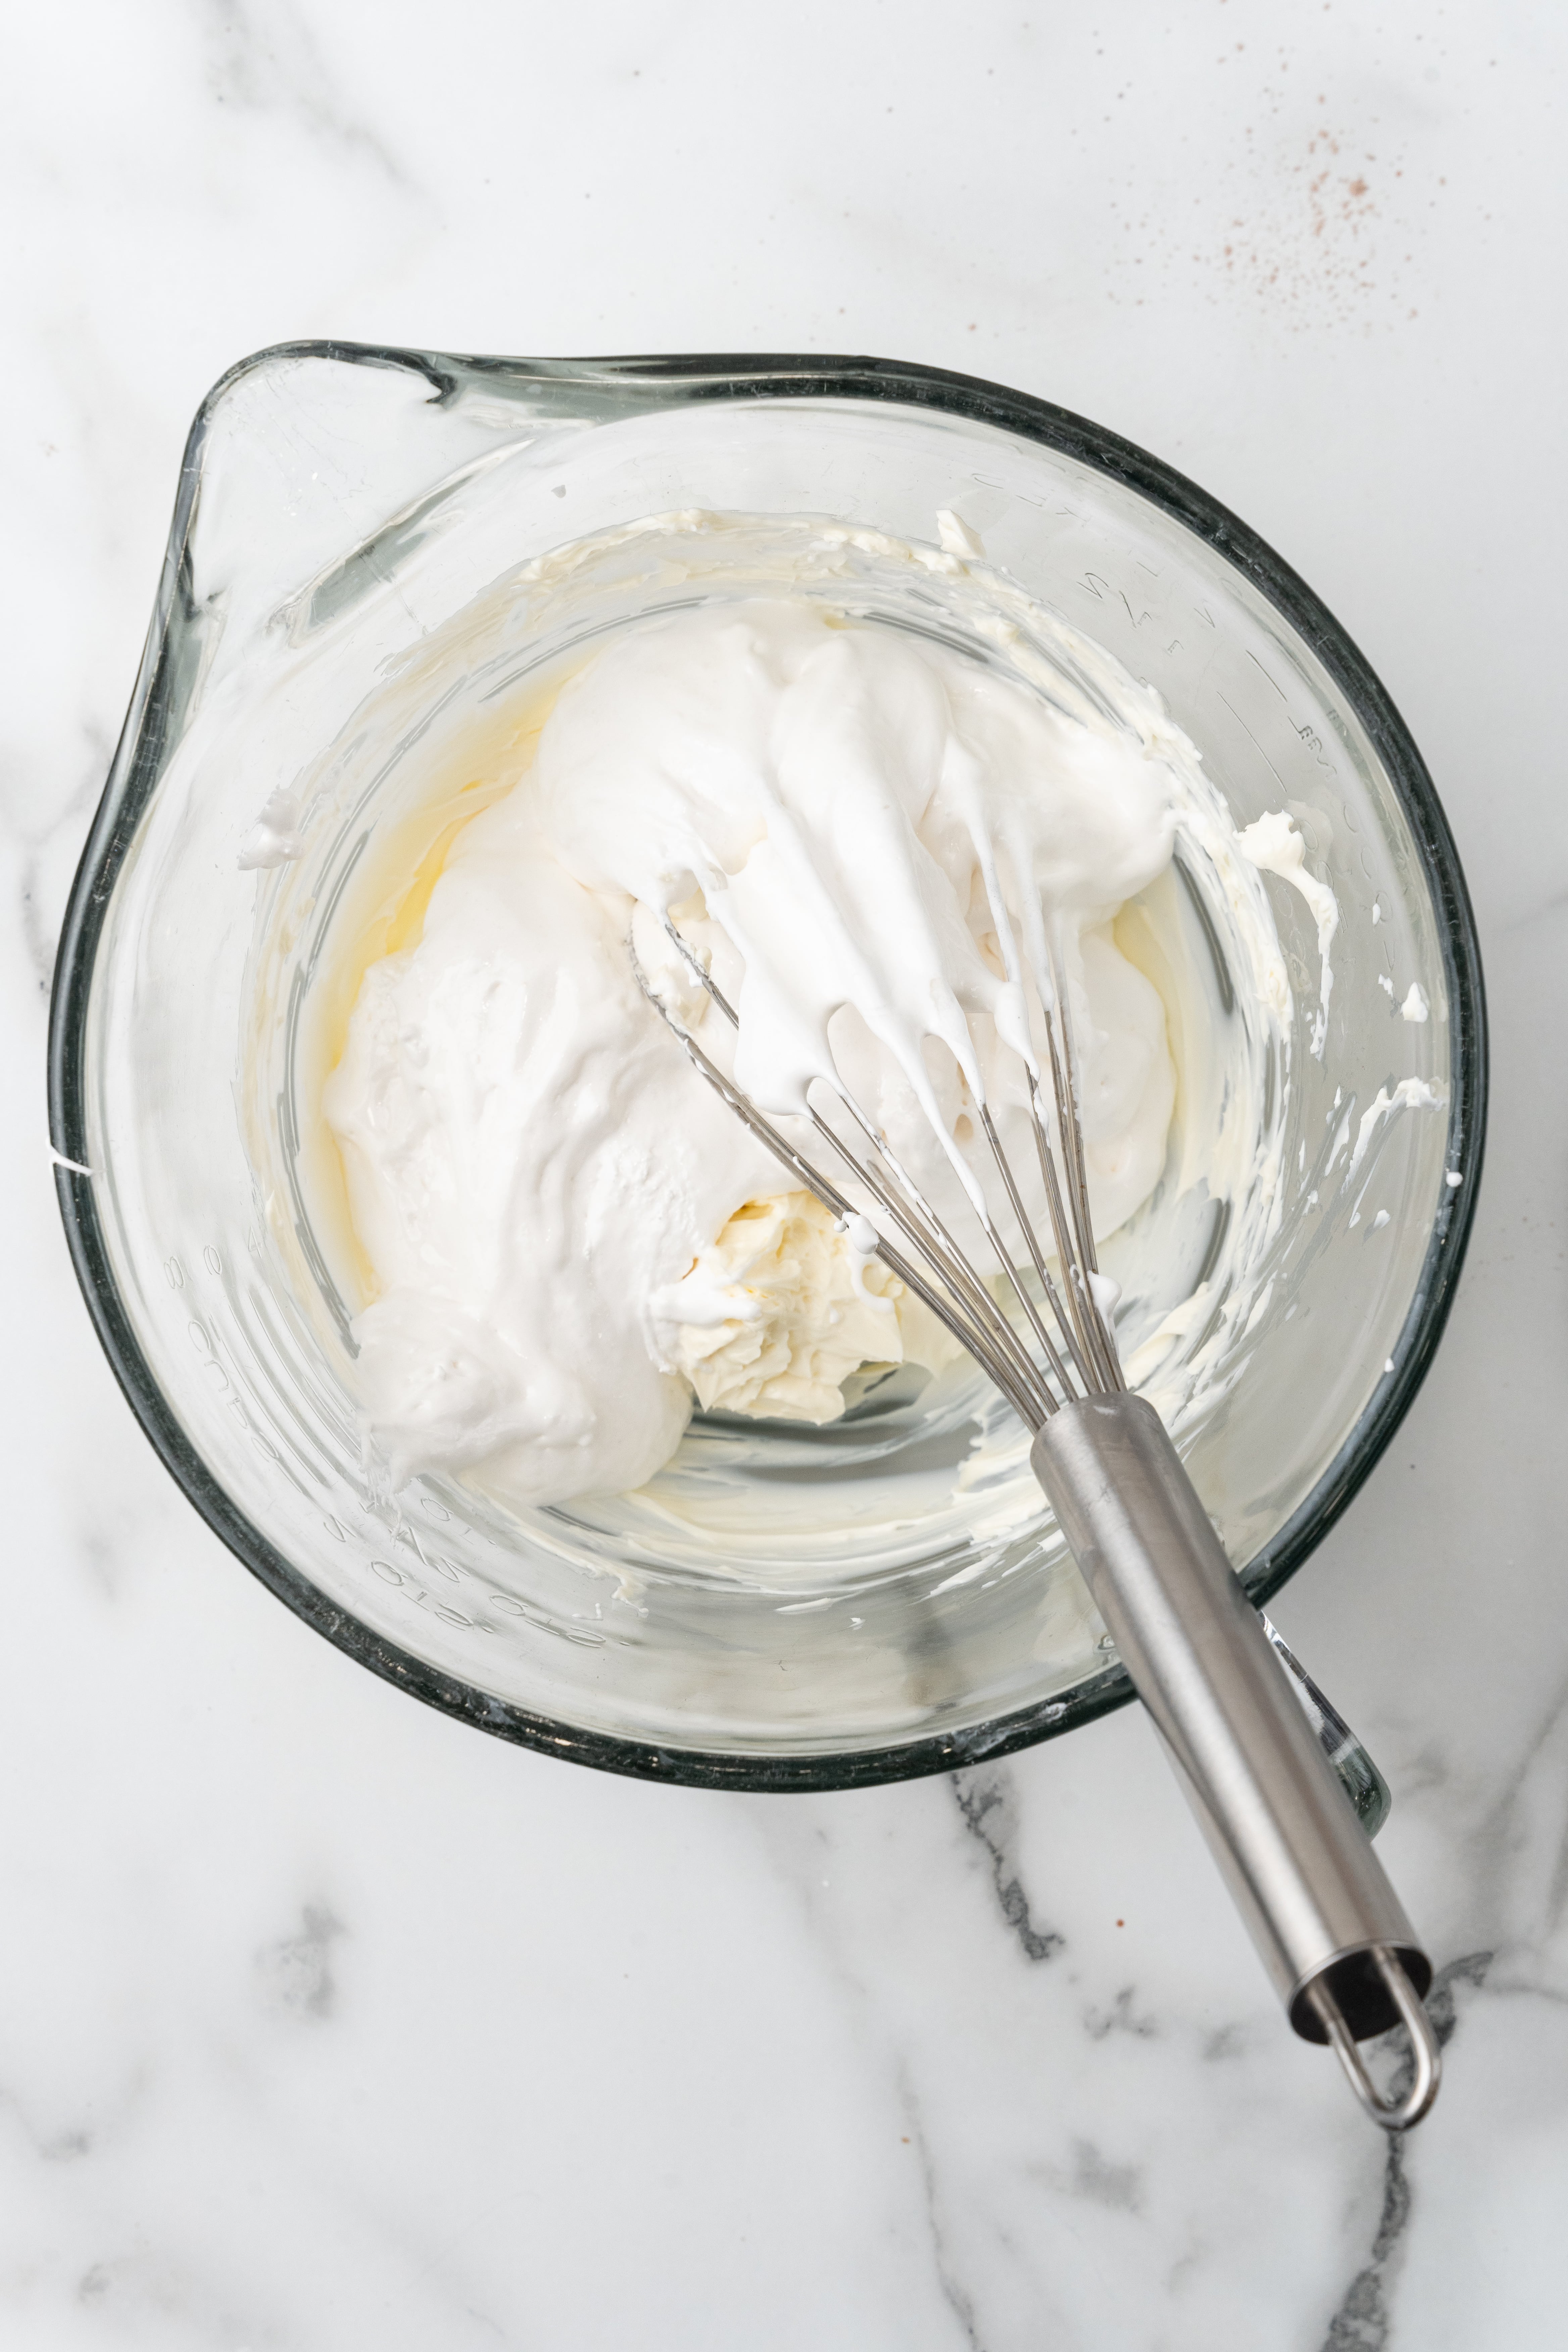 whipped cream cheese and marshmallow fluff in a glass mixing bowl